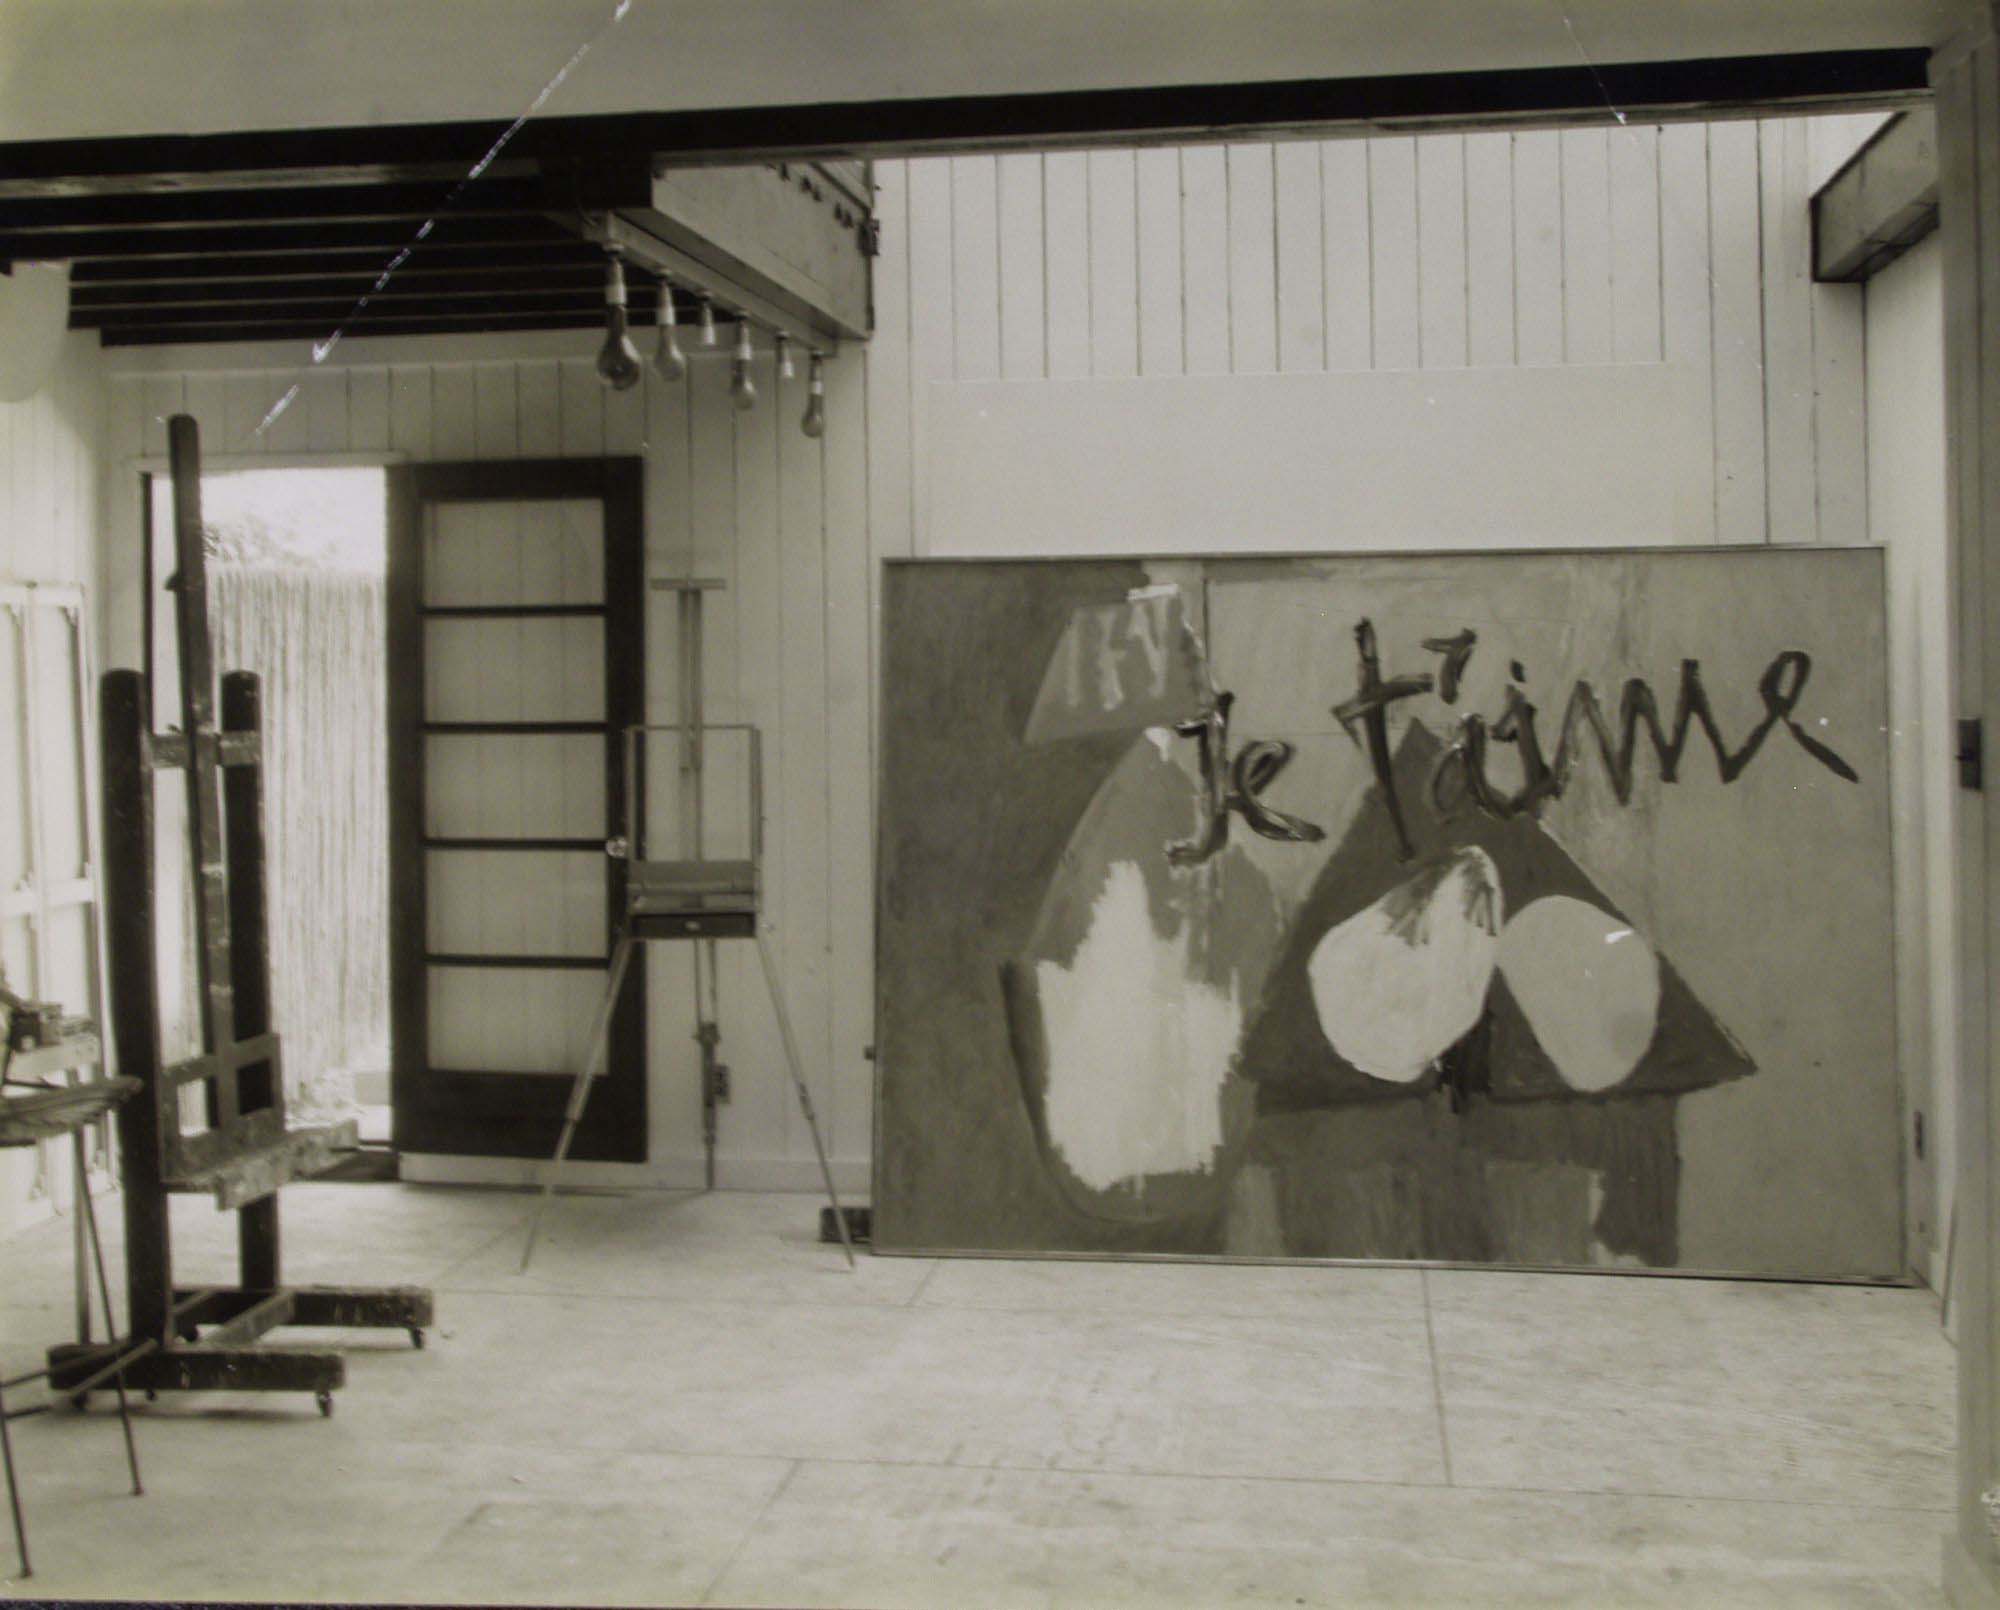 Motherwell’s East 94th Street studio, featuring his painting "Je t’aime No. IV" in 1958